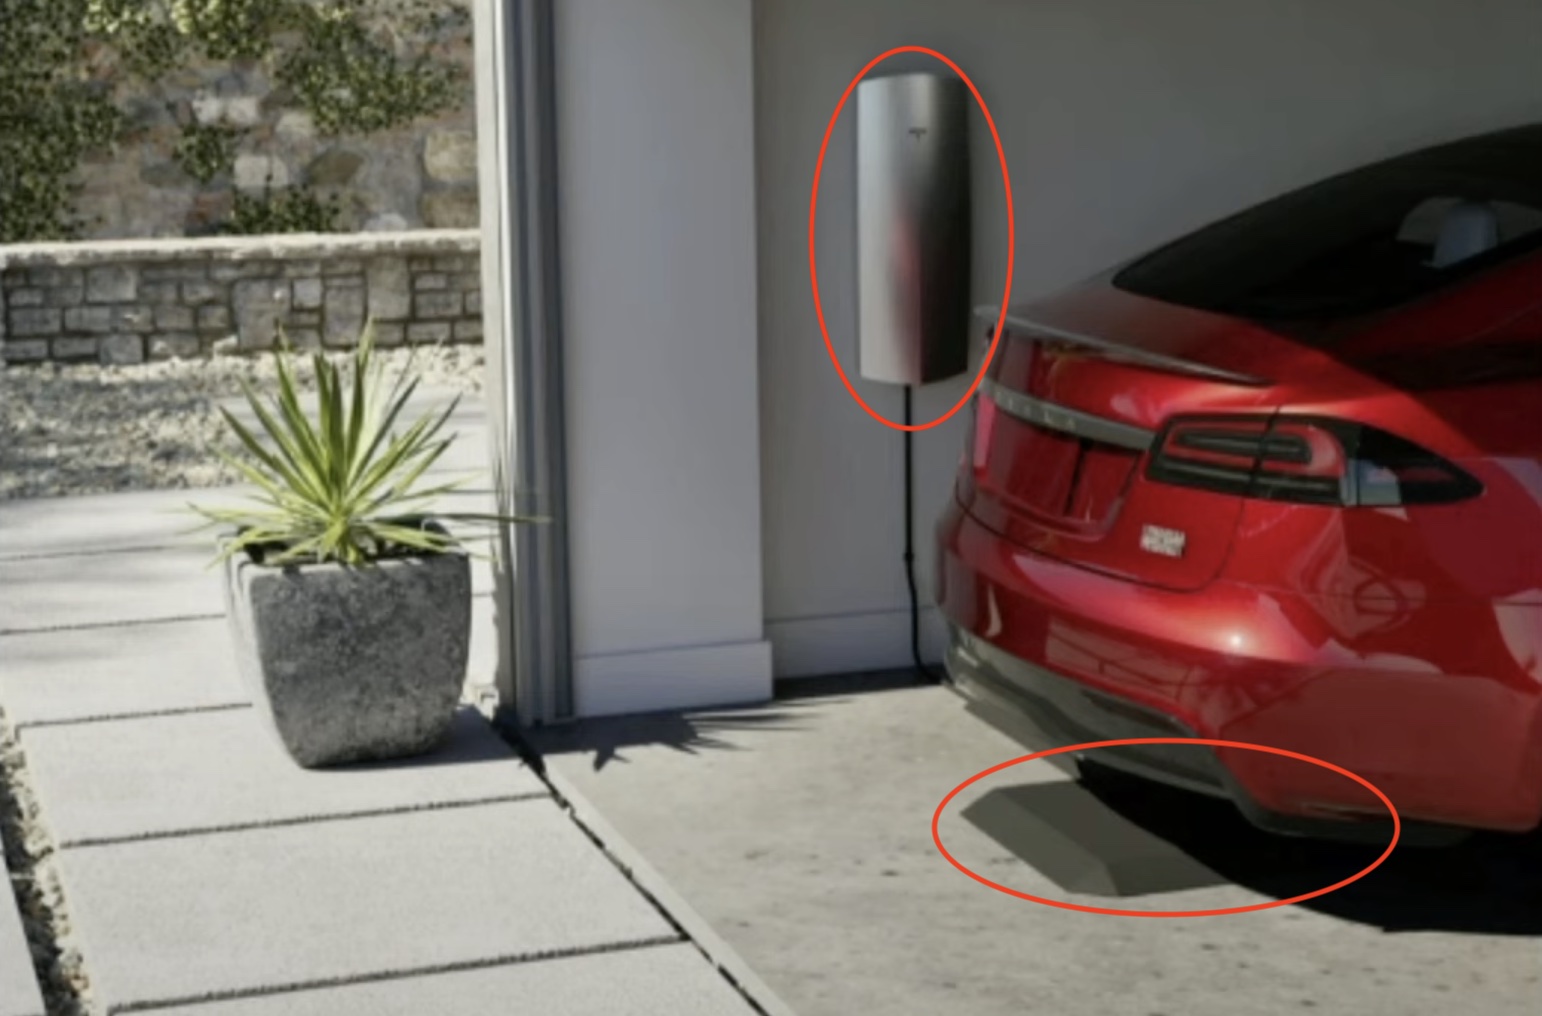 Tesla Looks Ready to Roll Out Wireless EV Charging